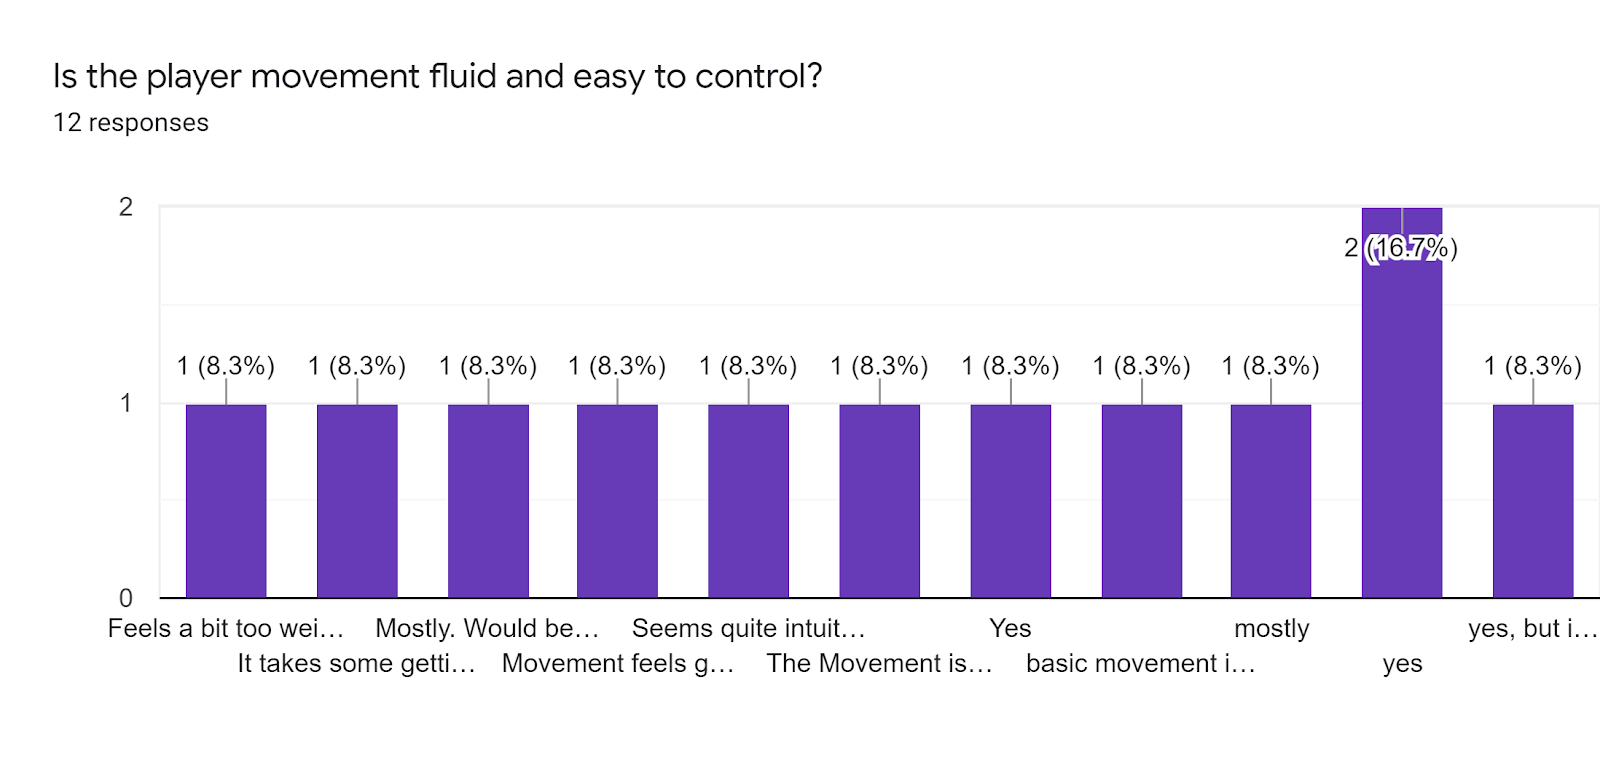 Forms response chart. Question title: Is the player movement fluid and easy to control?. Number of responses: 12 responses.